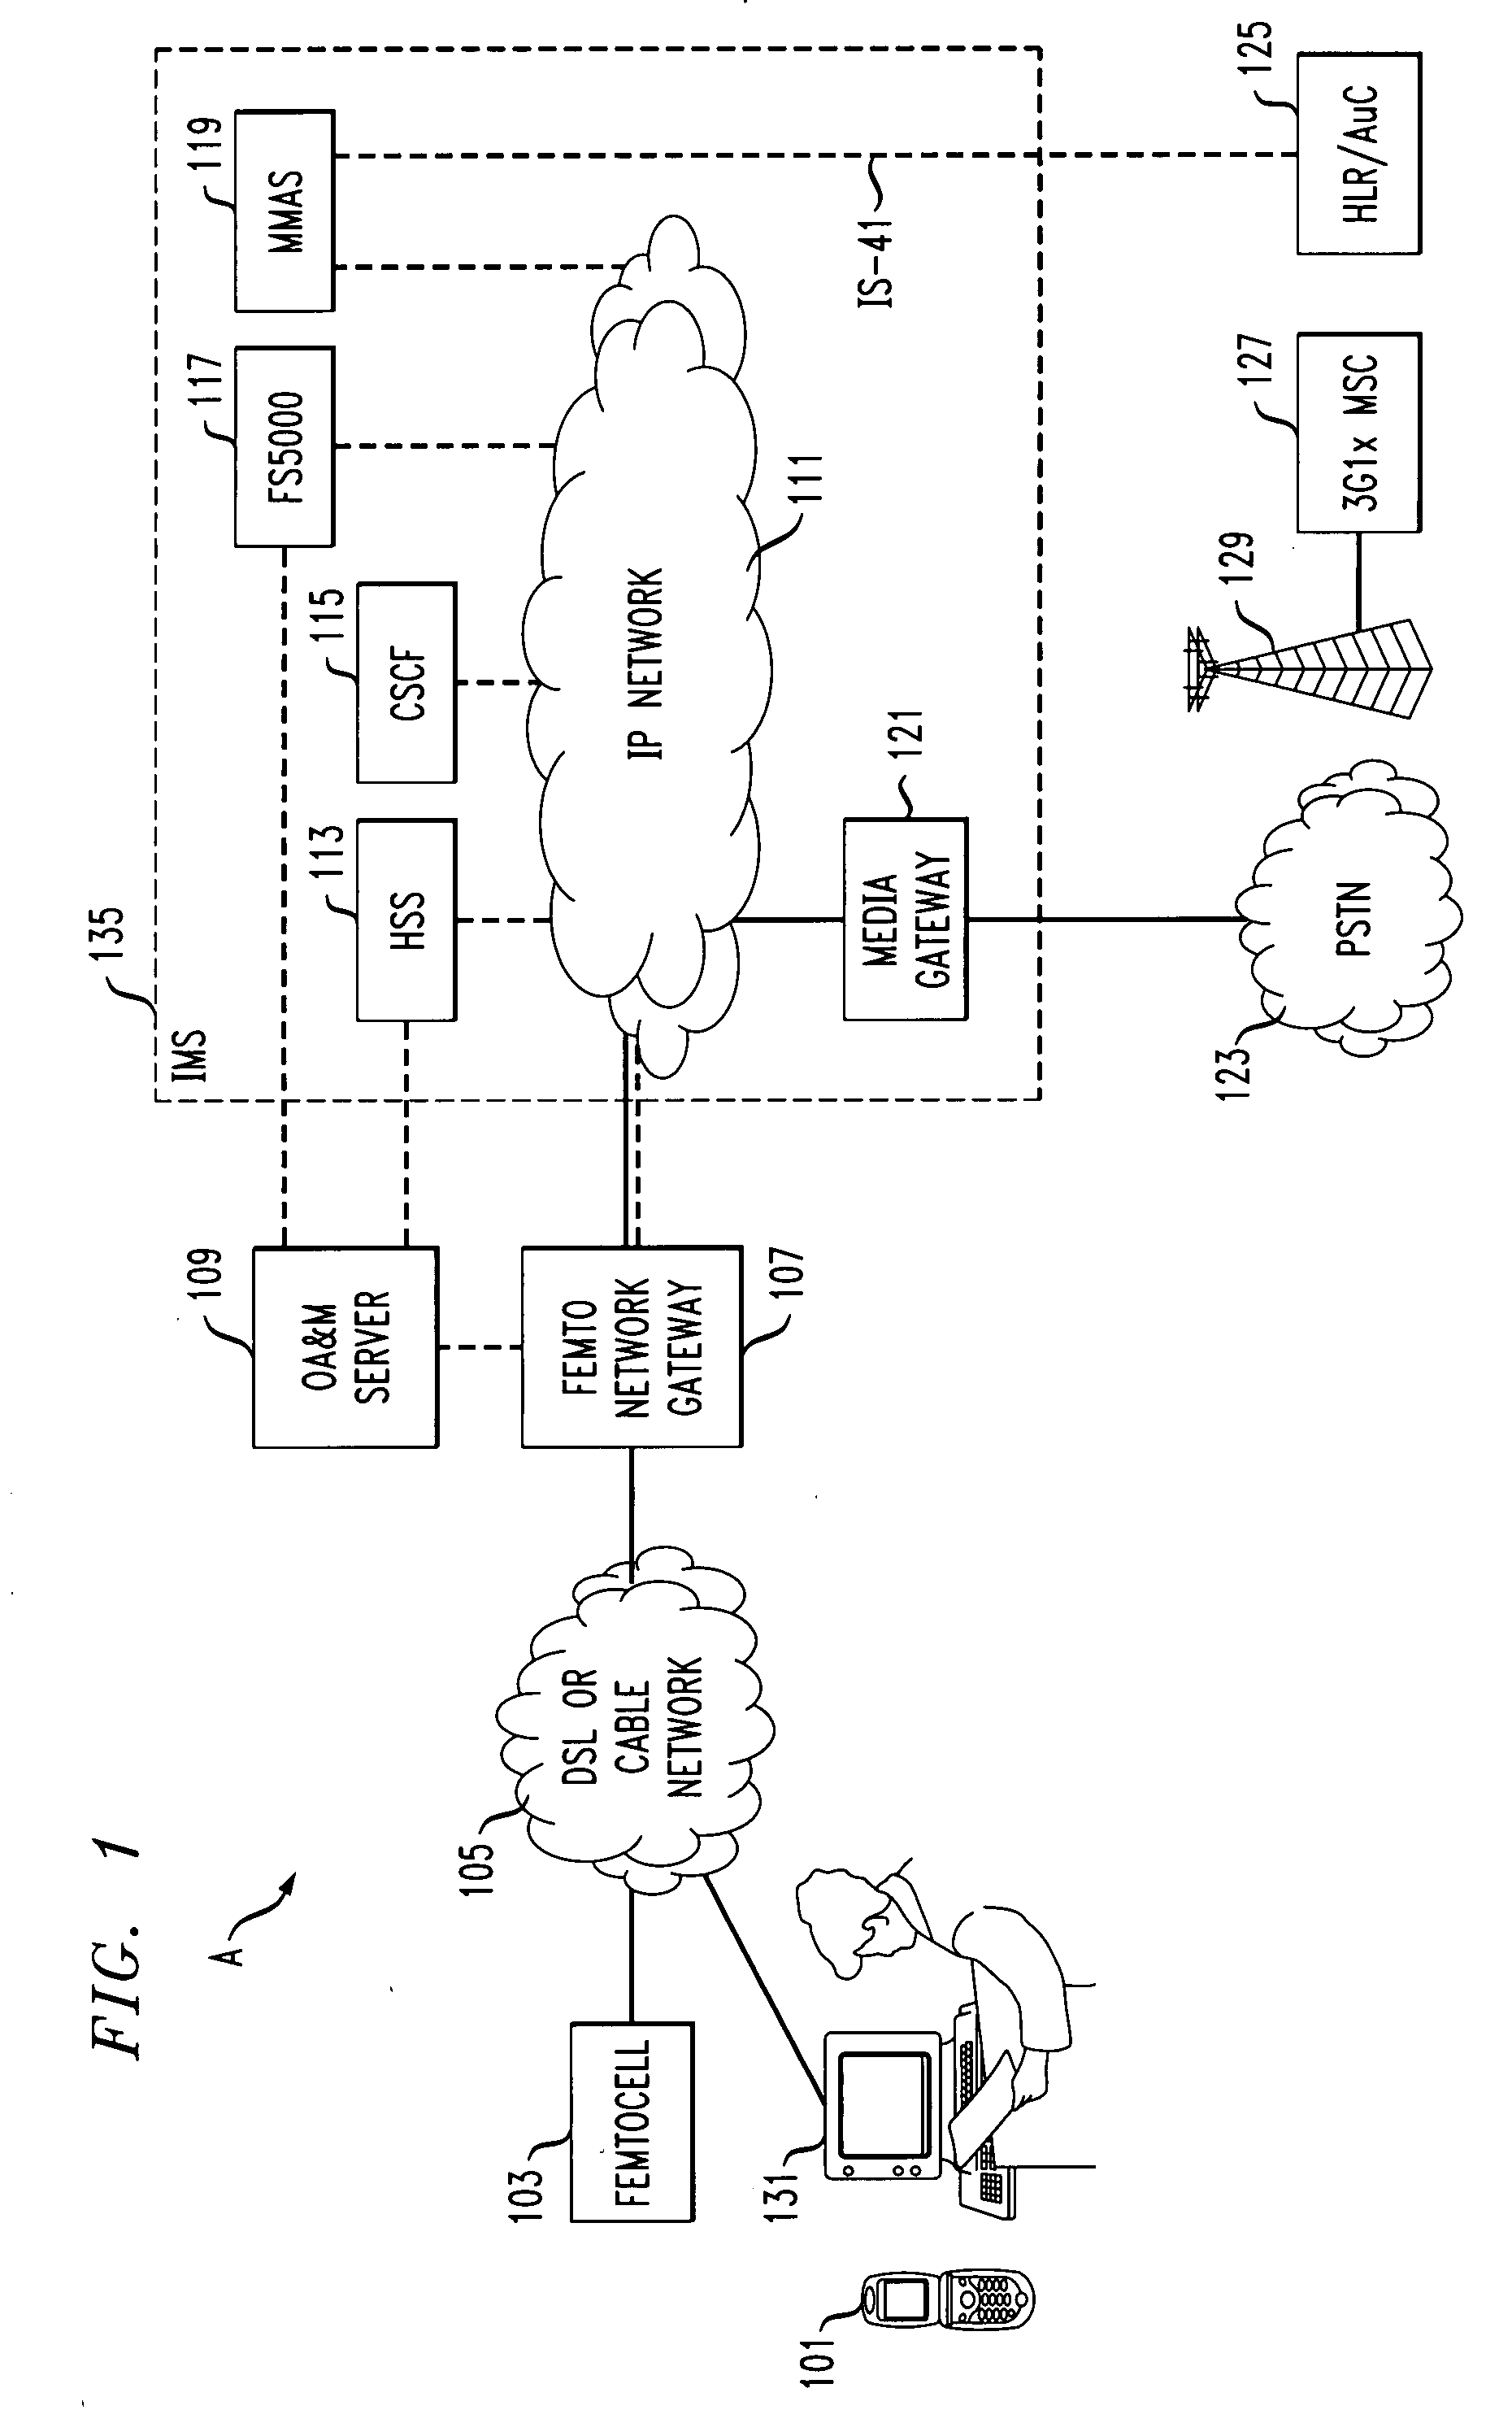 Method and apparatus for provisioning and authentication/registration for femtocell user on IMS core network